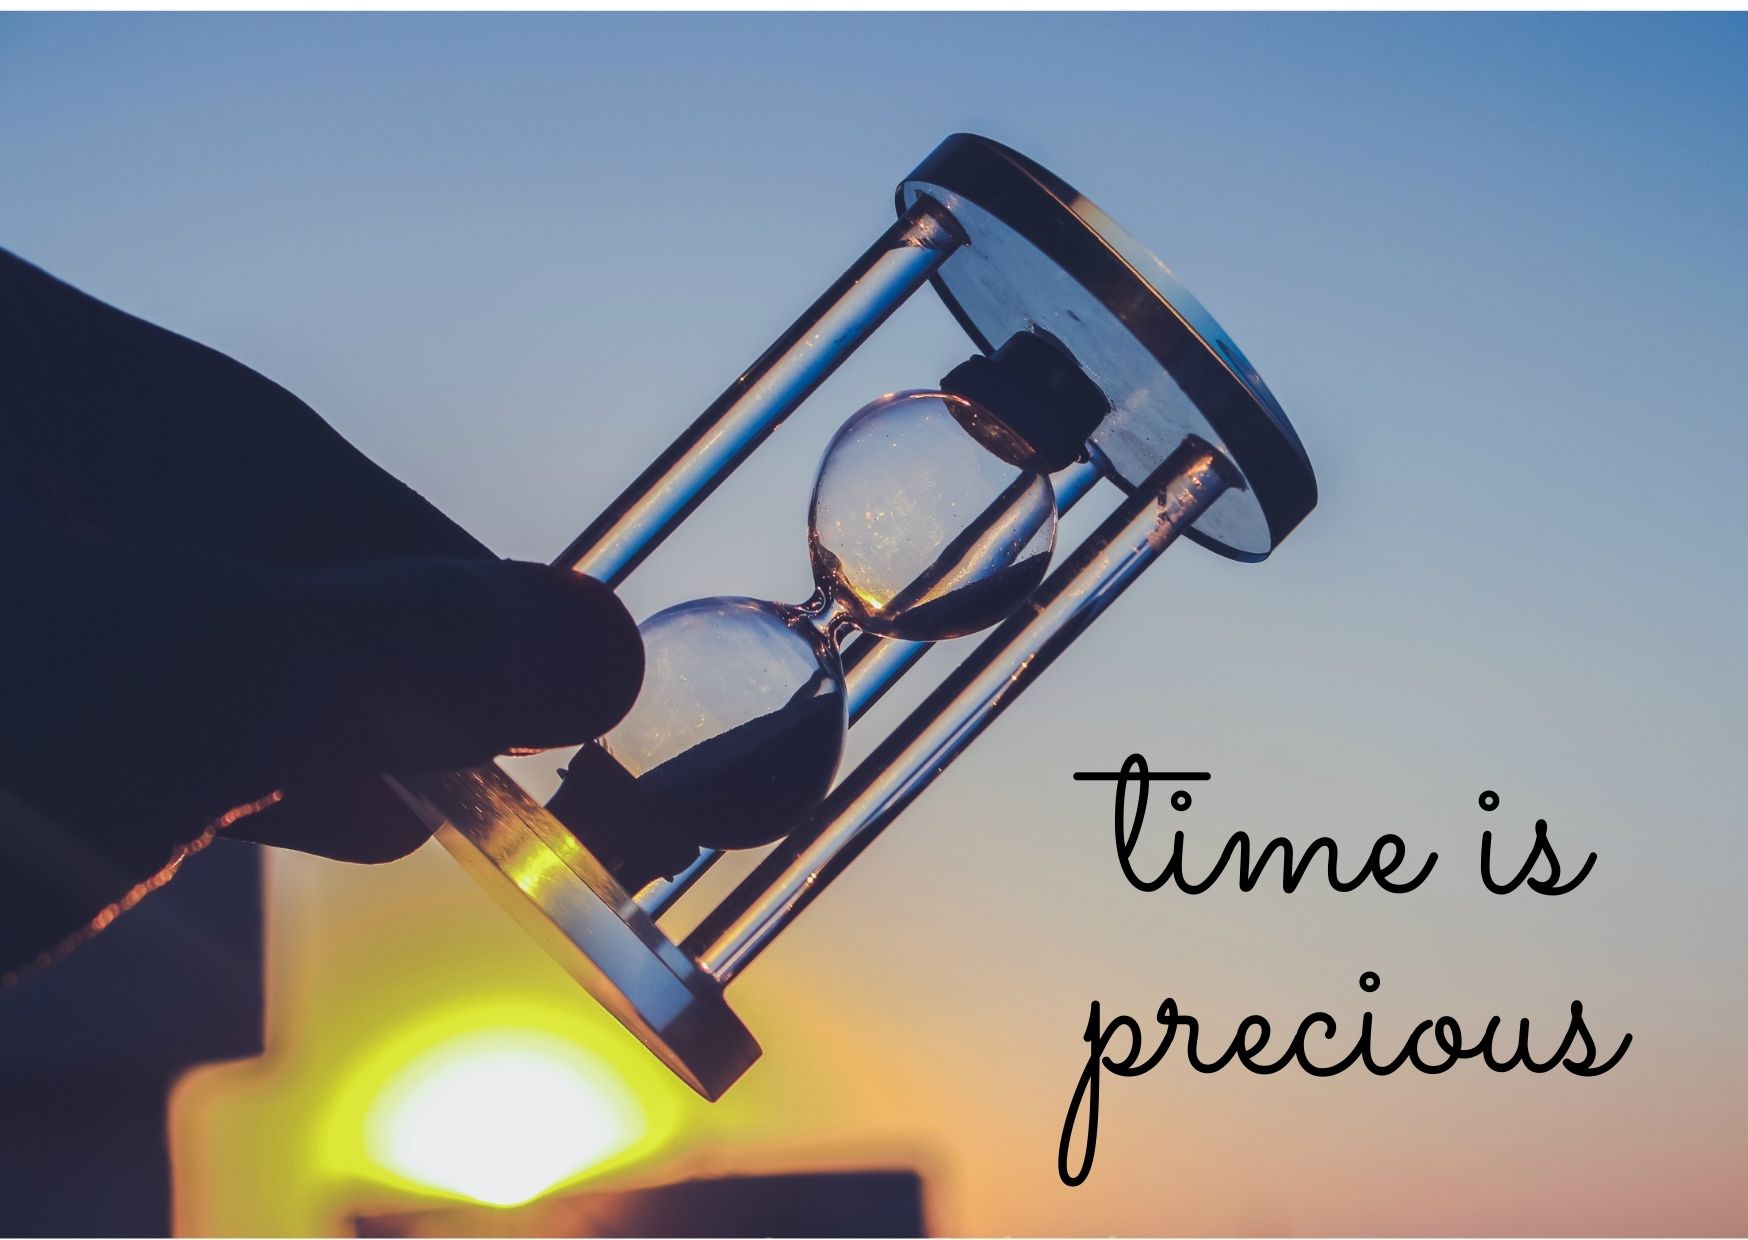 time is precious